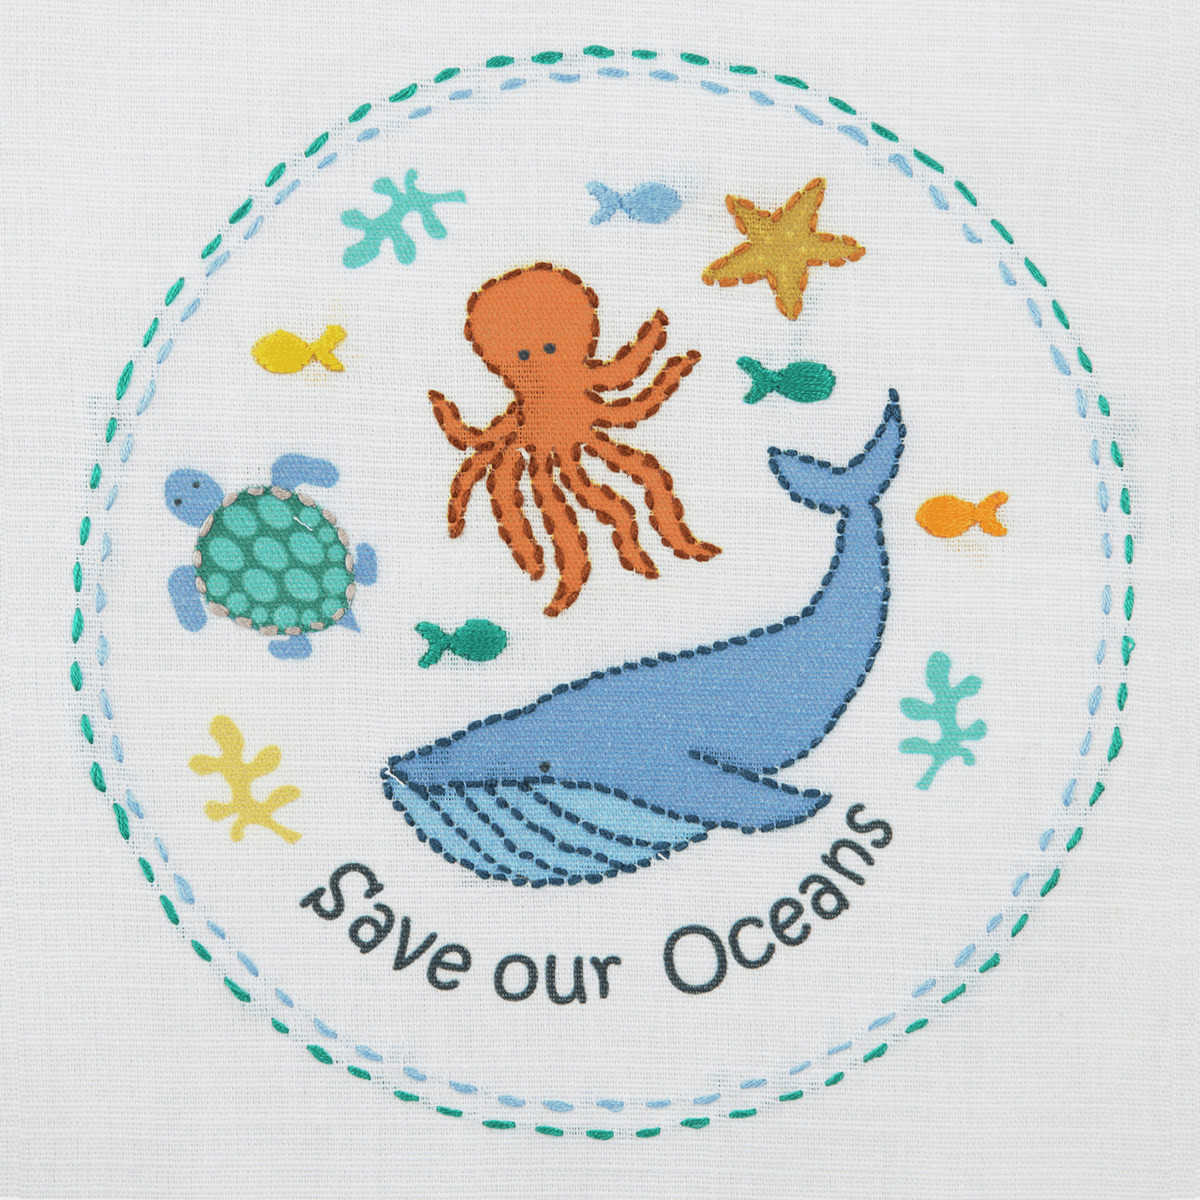 Anchor My 1st Embroidery Kit - Save Our Seas